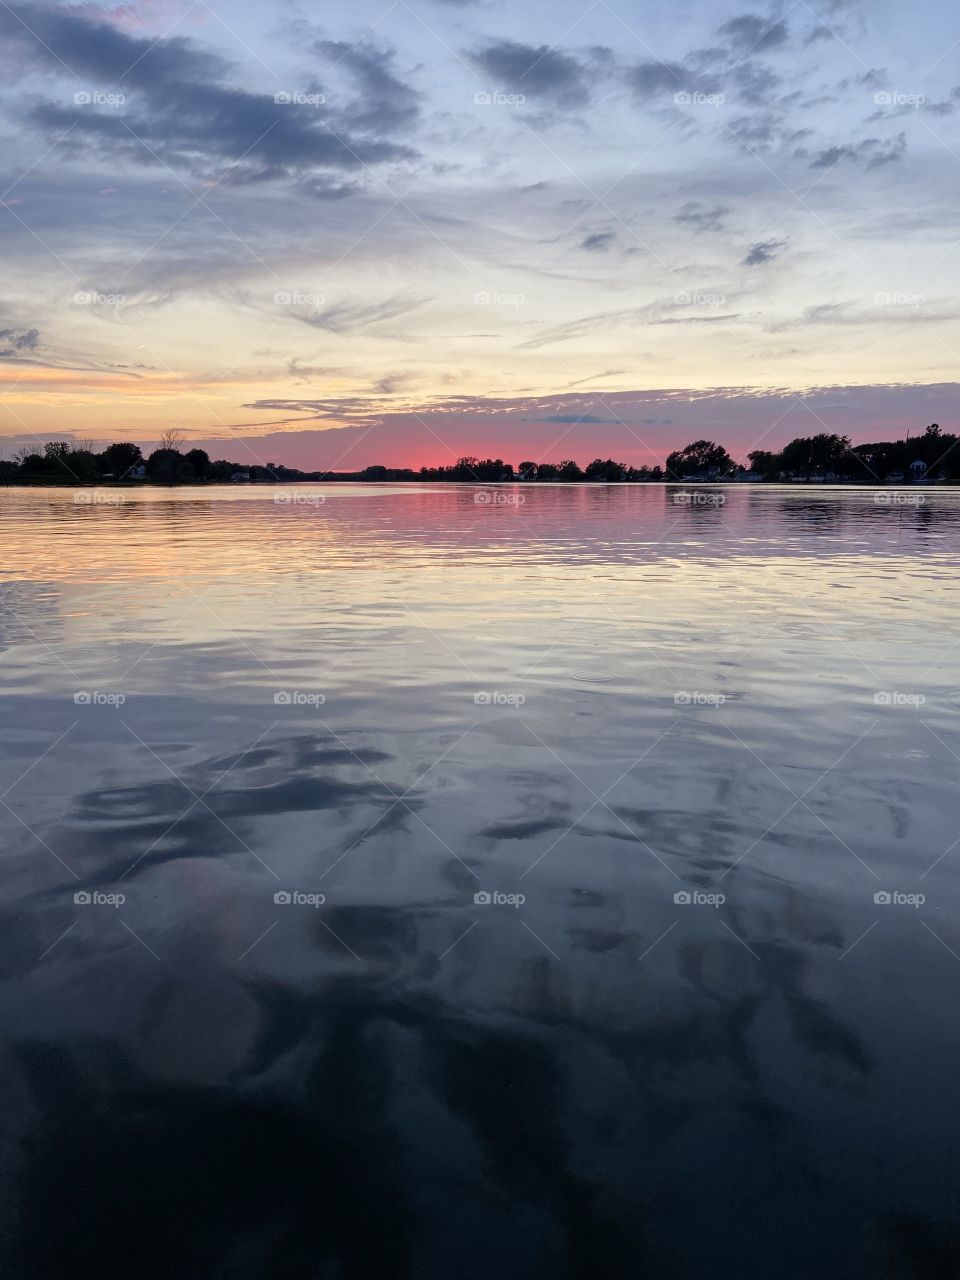 Warm colors in a cloudy sky makes a beautiful sunset reflection over a calm lake. 